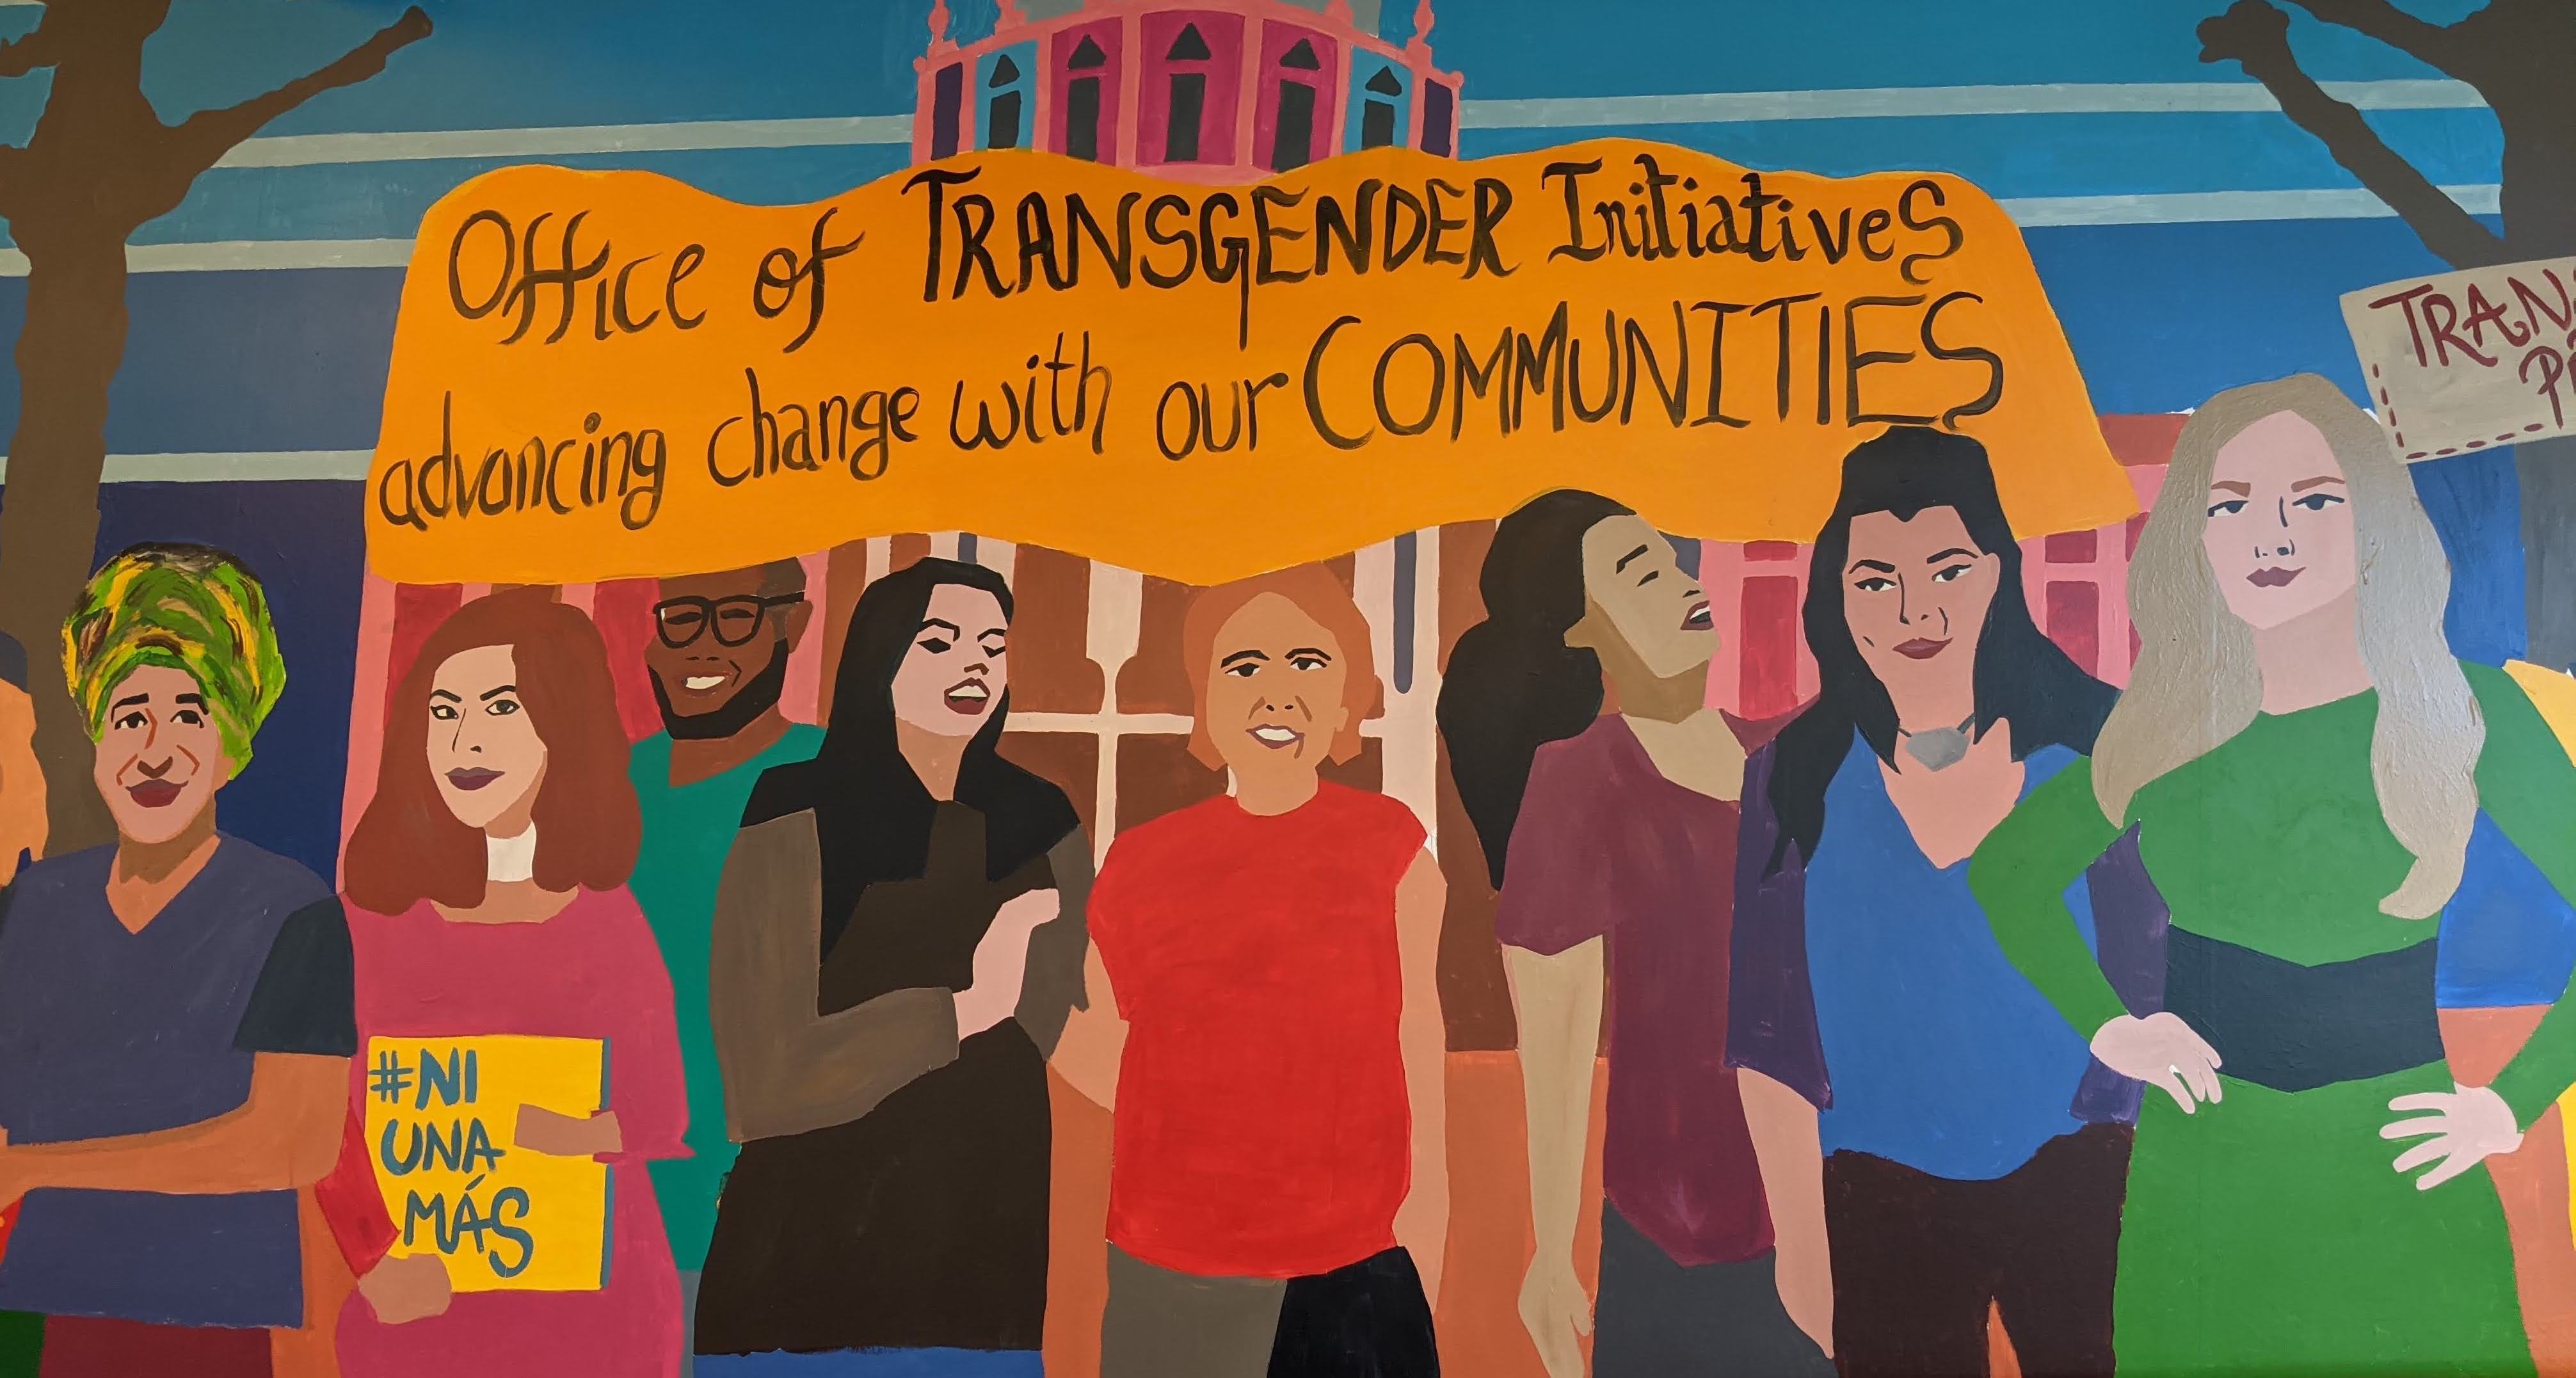 Mural with title "Office of Transgender Initiatives advancing change with our communities"